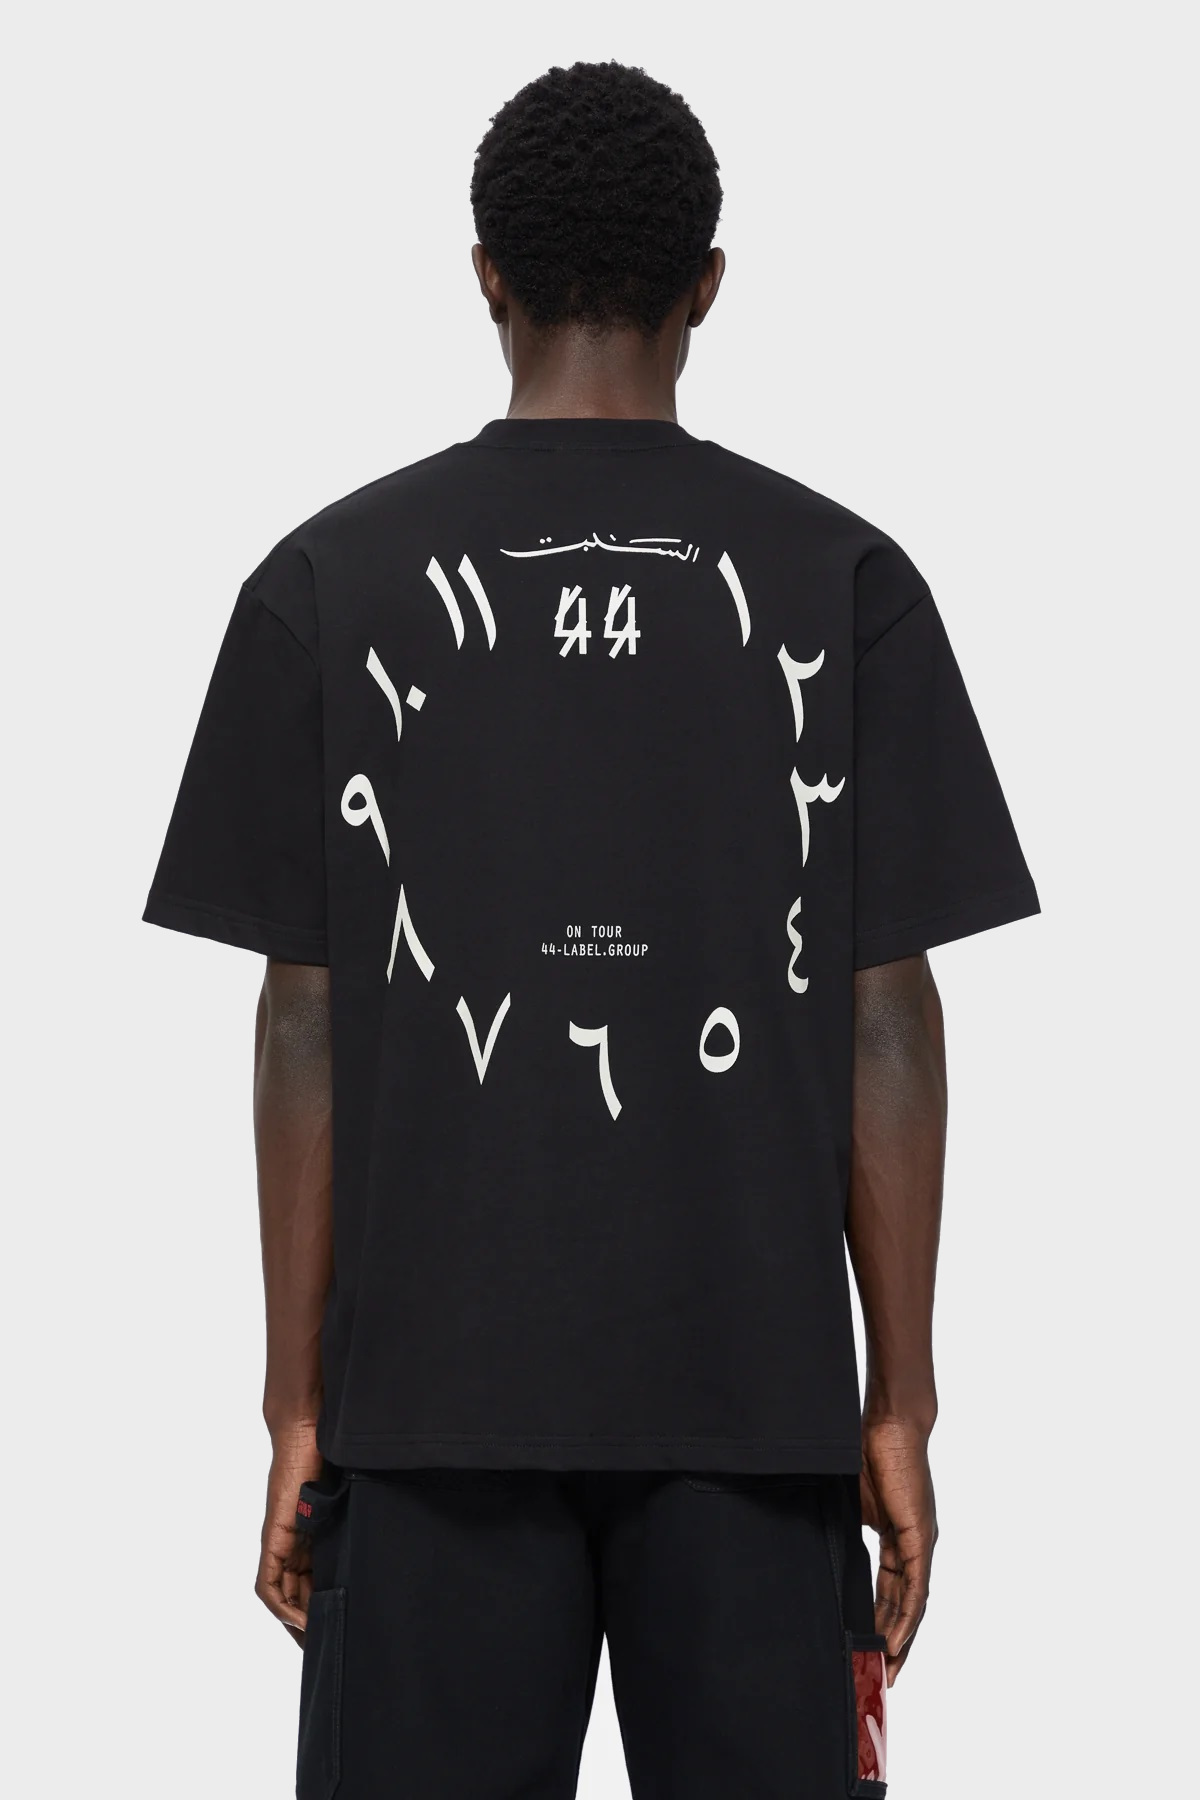 44 LABEL GROUP Arabic Dial Tee in Black 2XL